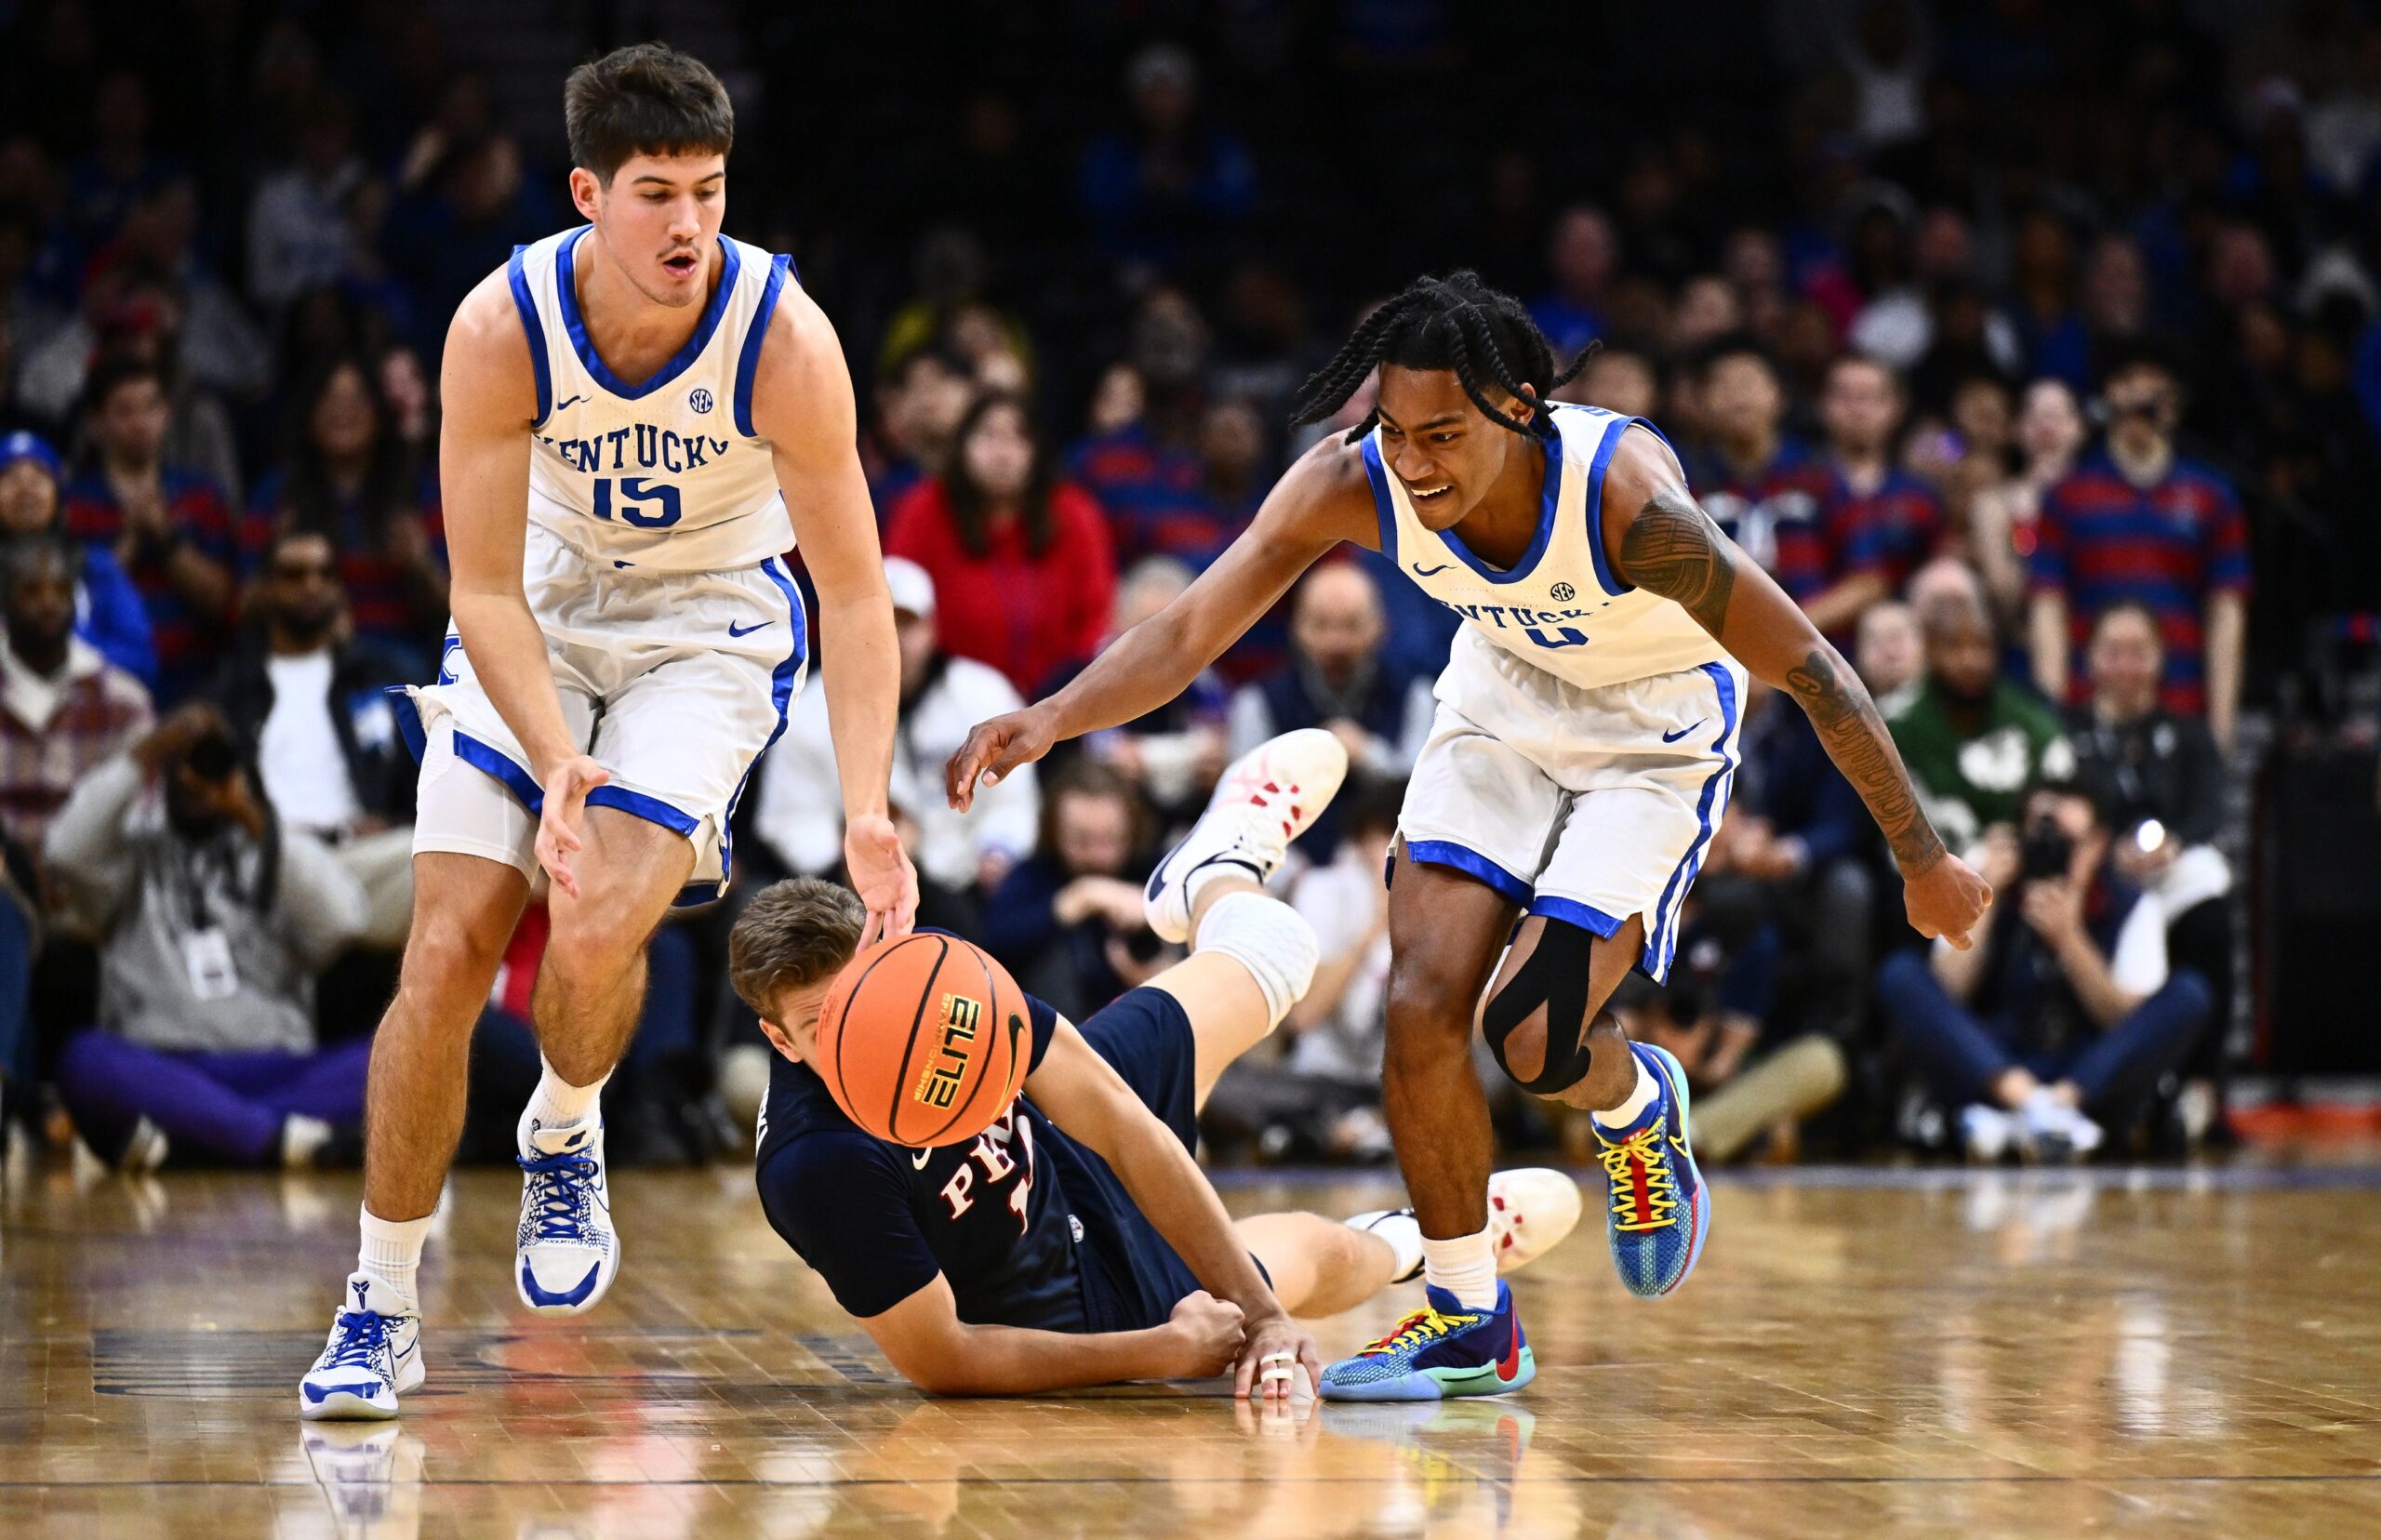 Dec 9, 2023; Philadelphia, Pennsylvania, USA; Kentucky Wildcats guard Reed Sheppard (15) and guard Rob Dillingham (0) chase a loose ball against the Penn Quakers in the second half at Wells Fargo Center. Mandatory Credit: Kyle Ross-USA TODAY Sports